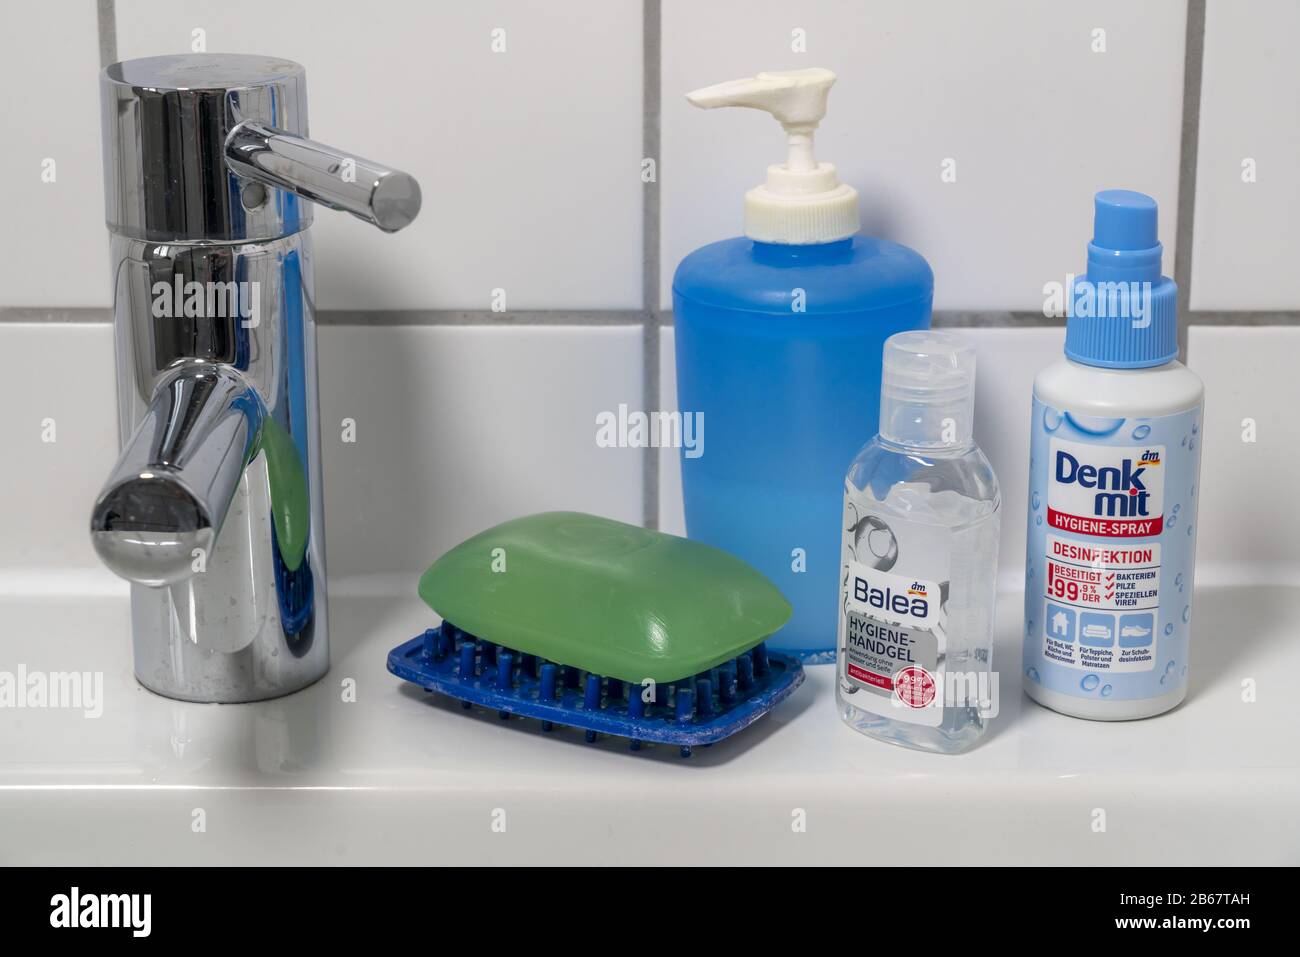 Domestic hygiene, washing hands, hygiene hand gel, bar of soap, liquid soap  from the soap dispenser, disinfection spray Stock Photo - Alamy